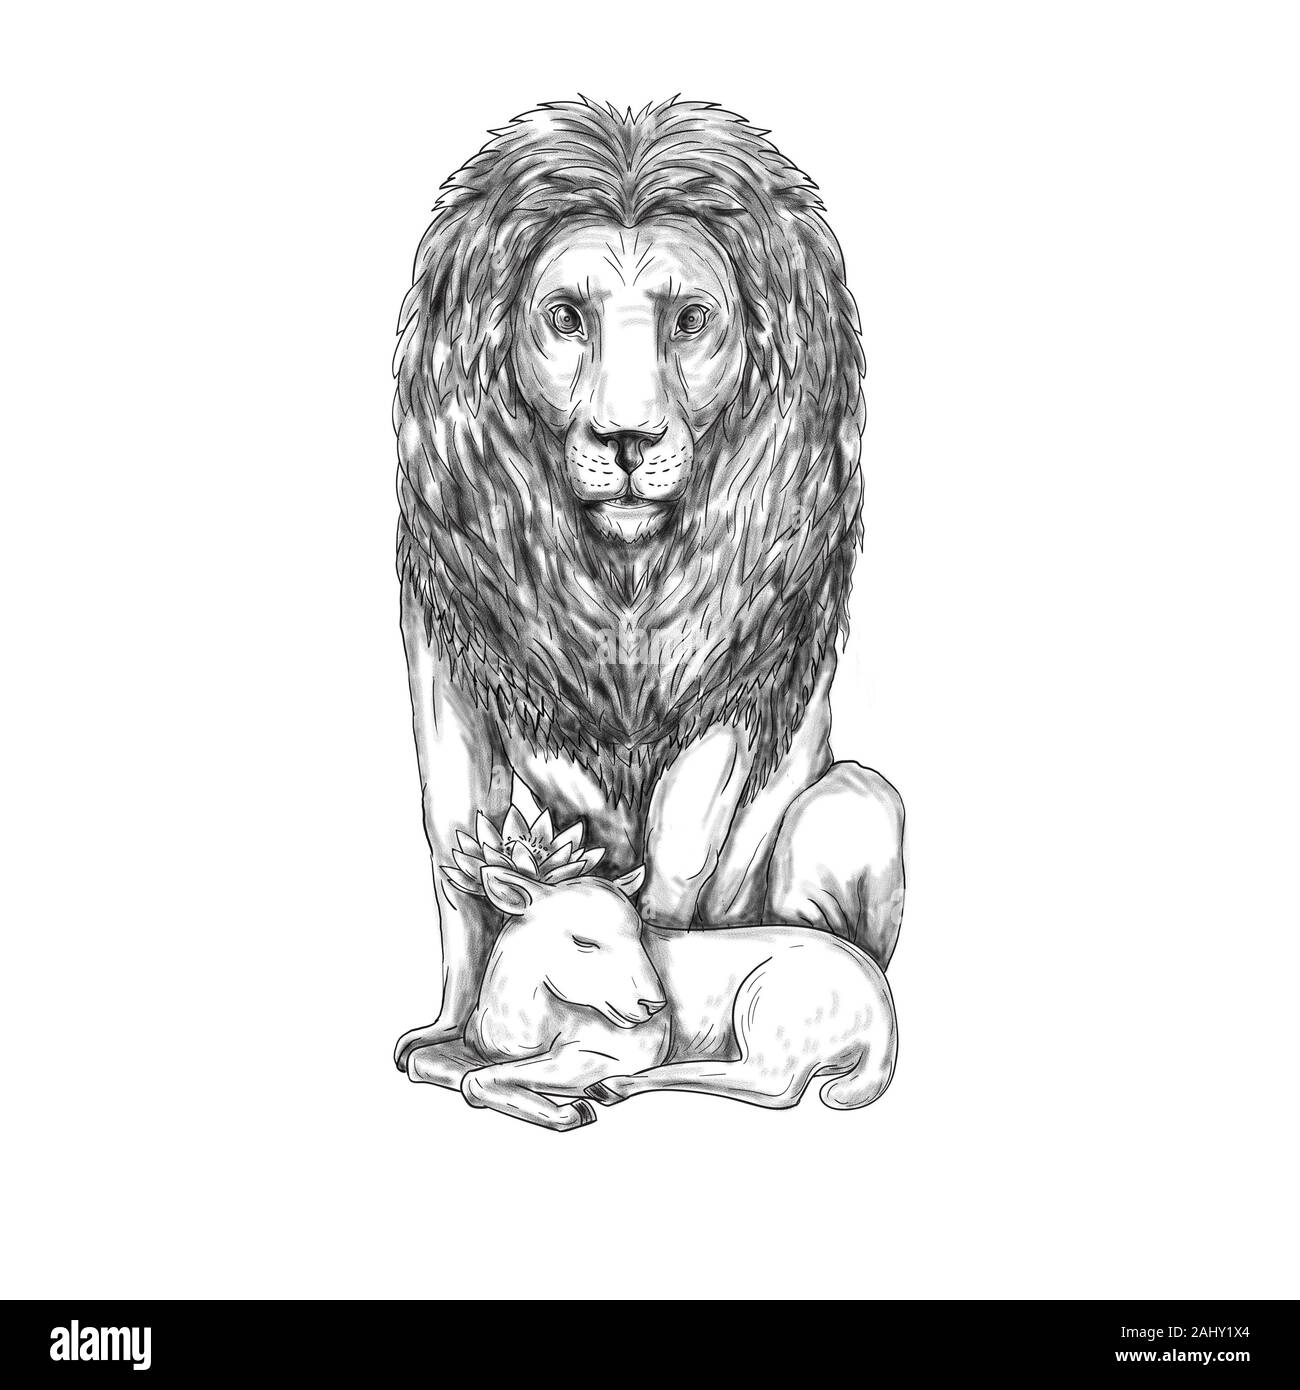 Tattoo style illustration of a lion watching over a sleeping lamb viewed from front set on isolated white background. Stock Photo